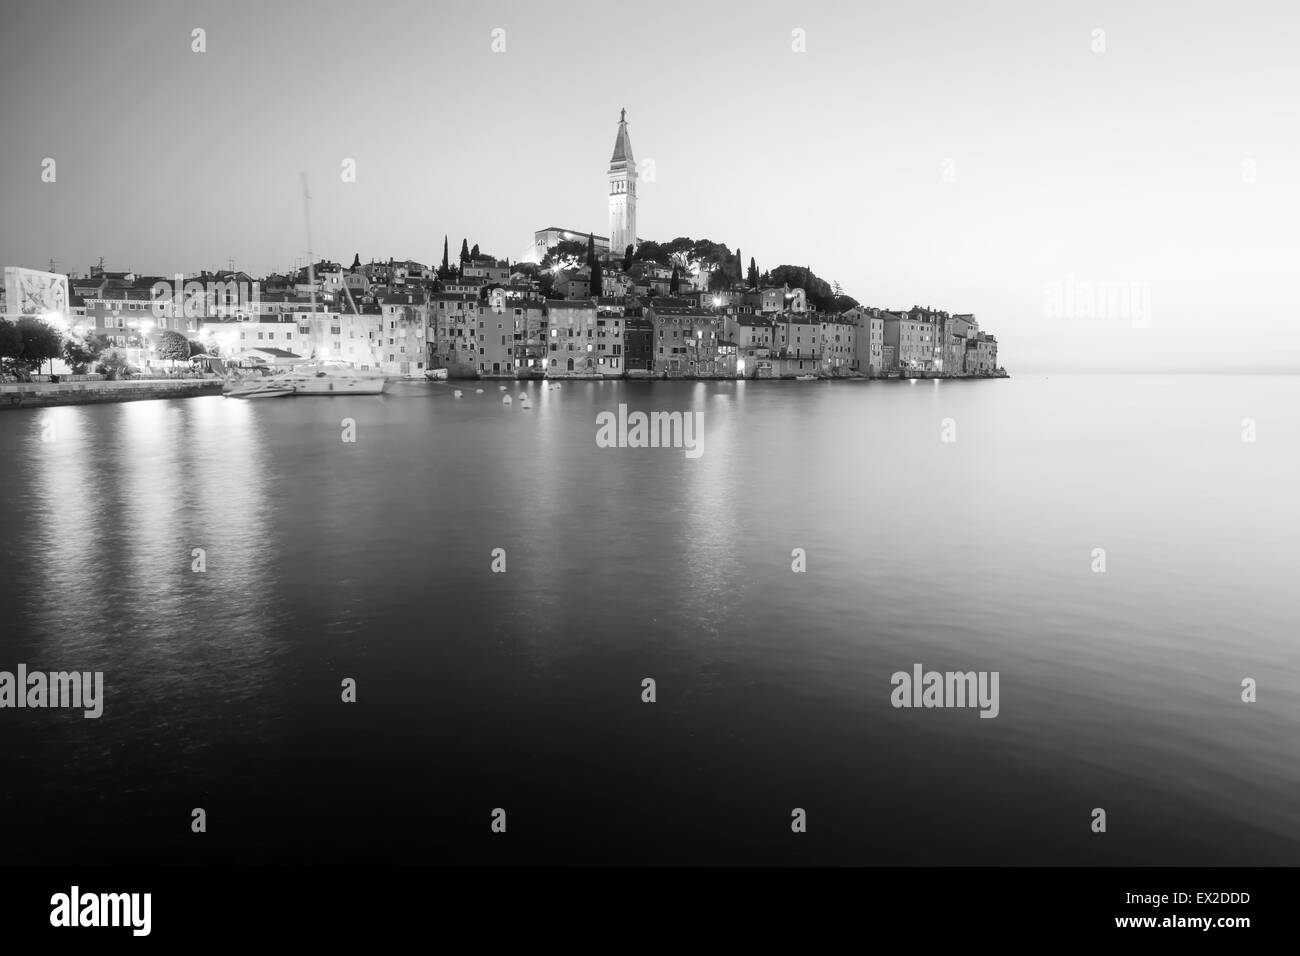 A view of the old city core with the Saint Euphemia church and bell tower at sunset in Rovinj, Croatia. Stock Photo